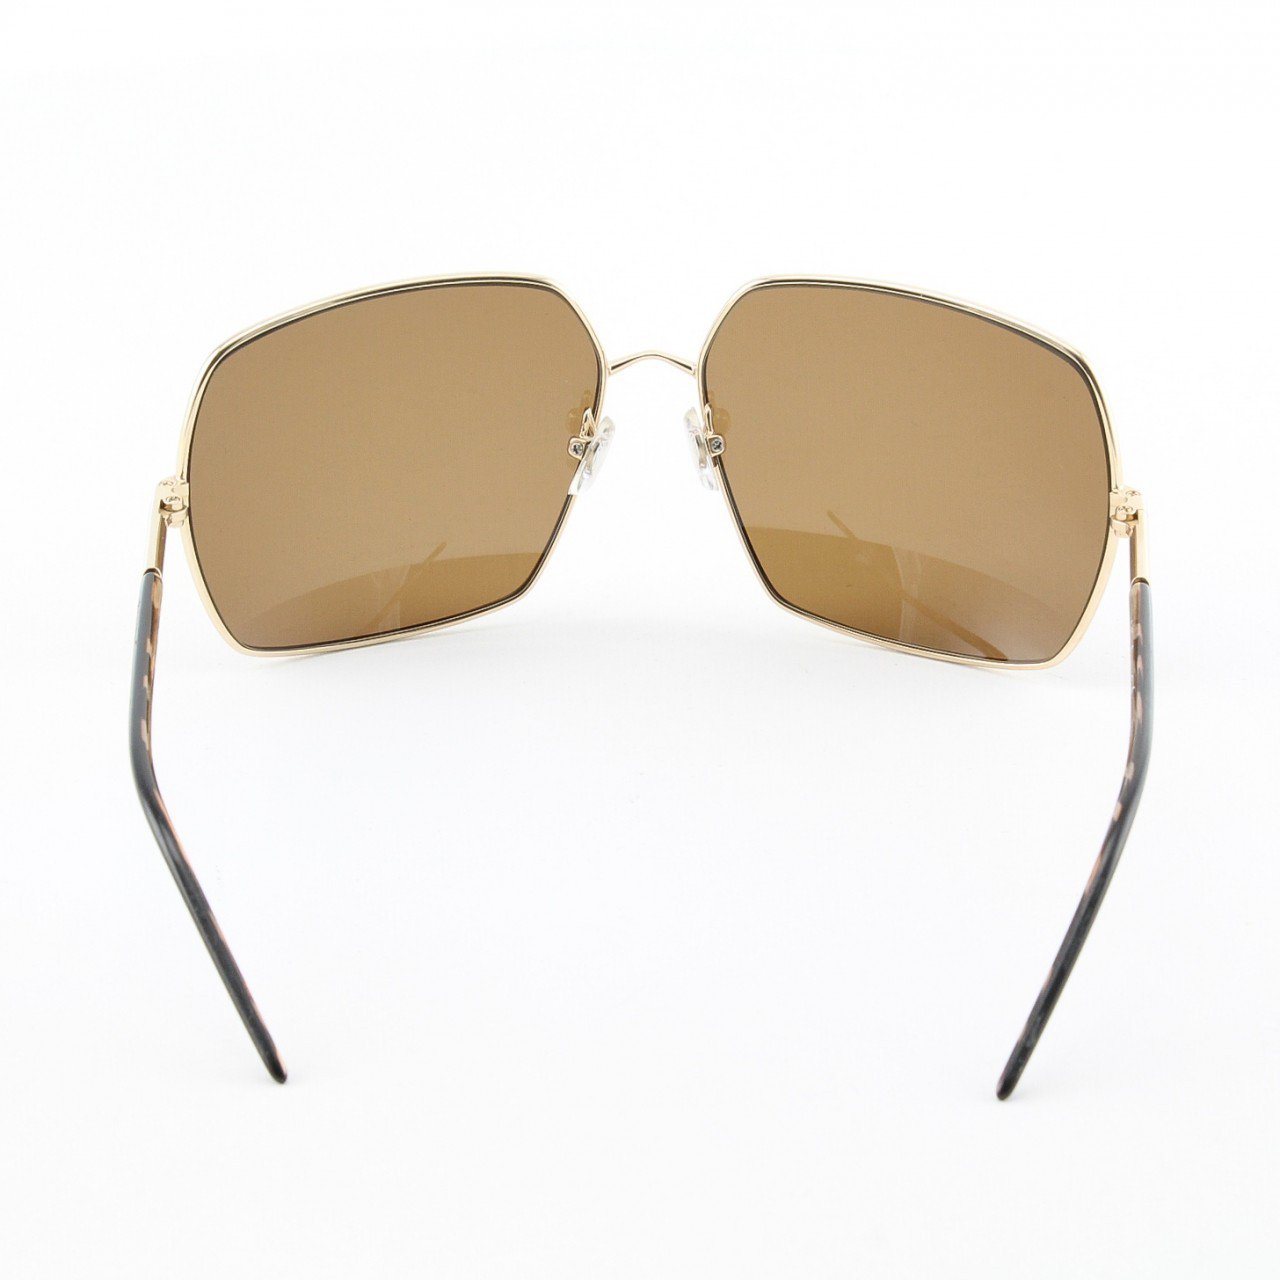 Blinde C'mon Women's Sunglasses Col. Gold with Solid Brown Lenses